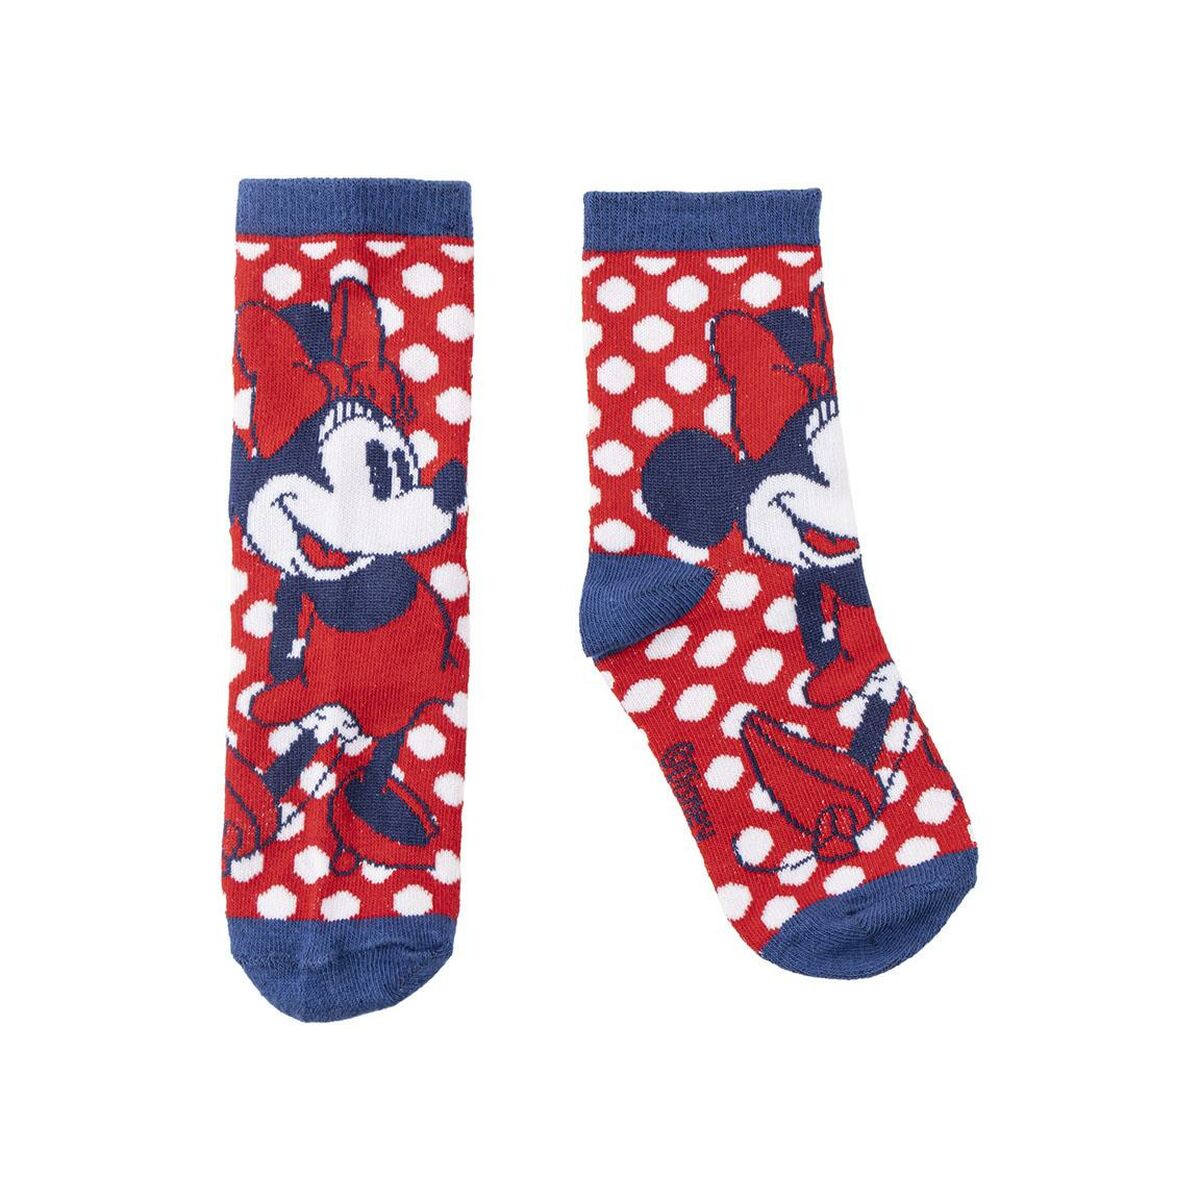 Socks Minnie Mouse 5 Pieces